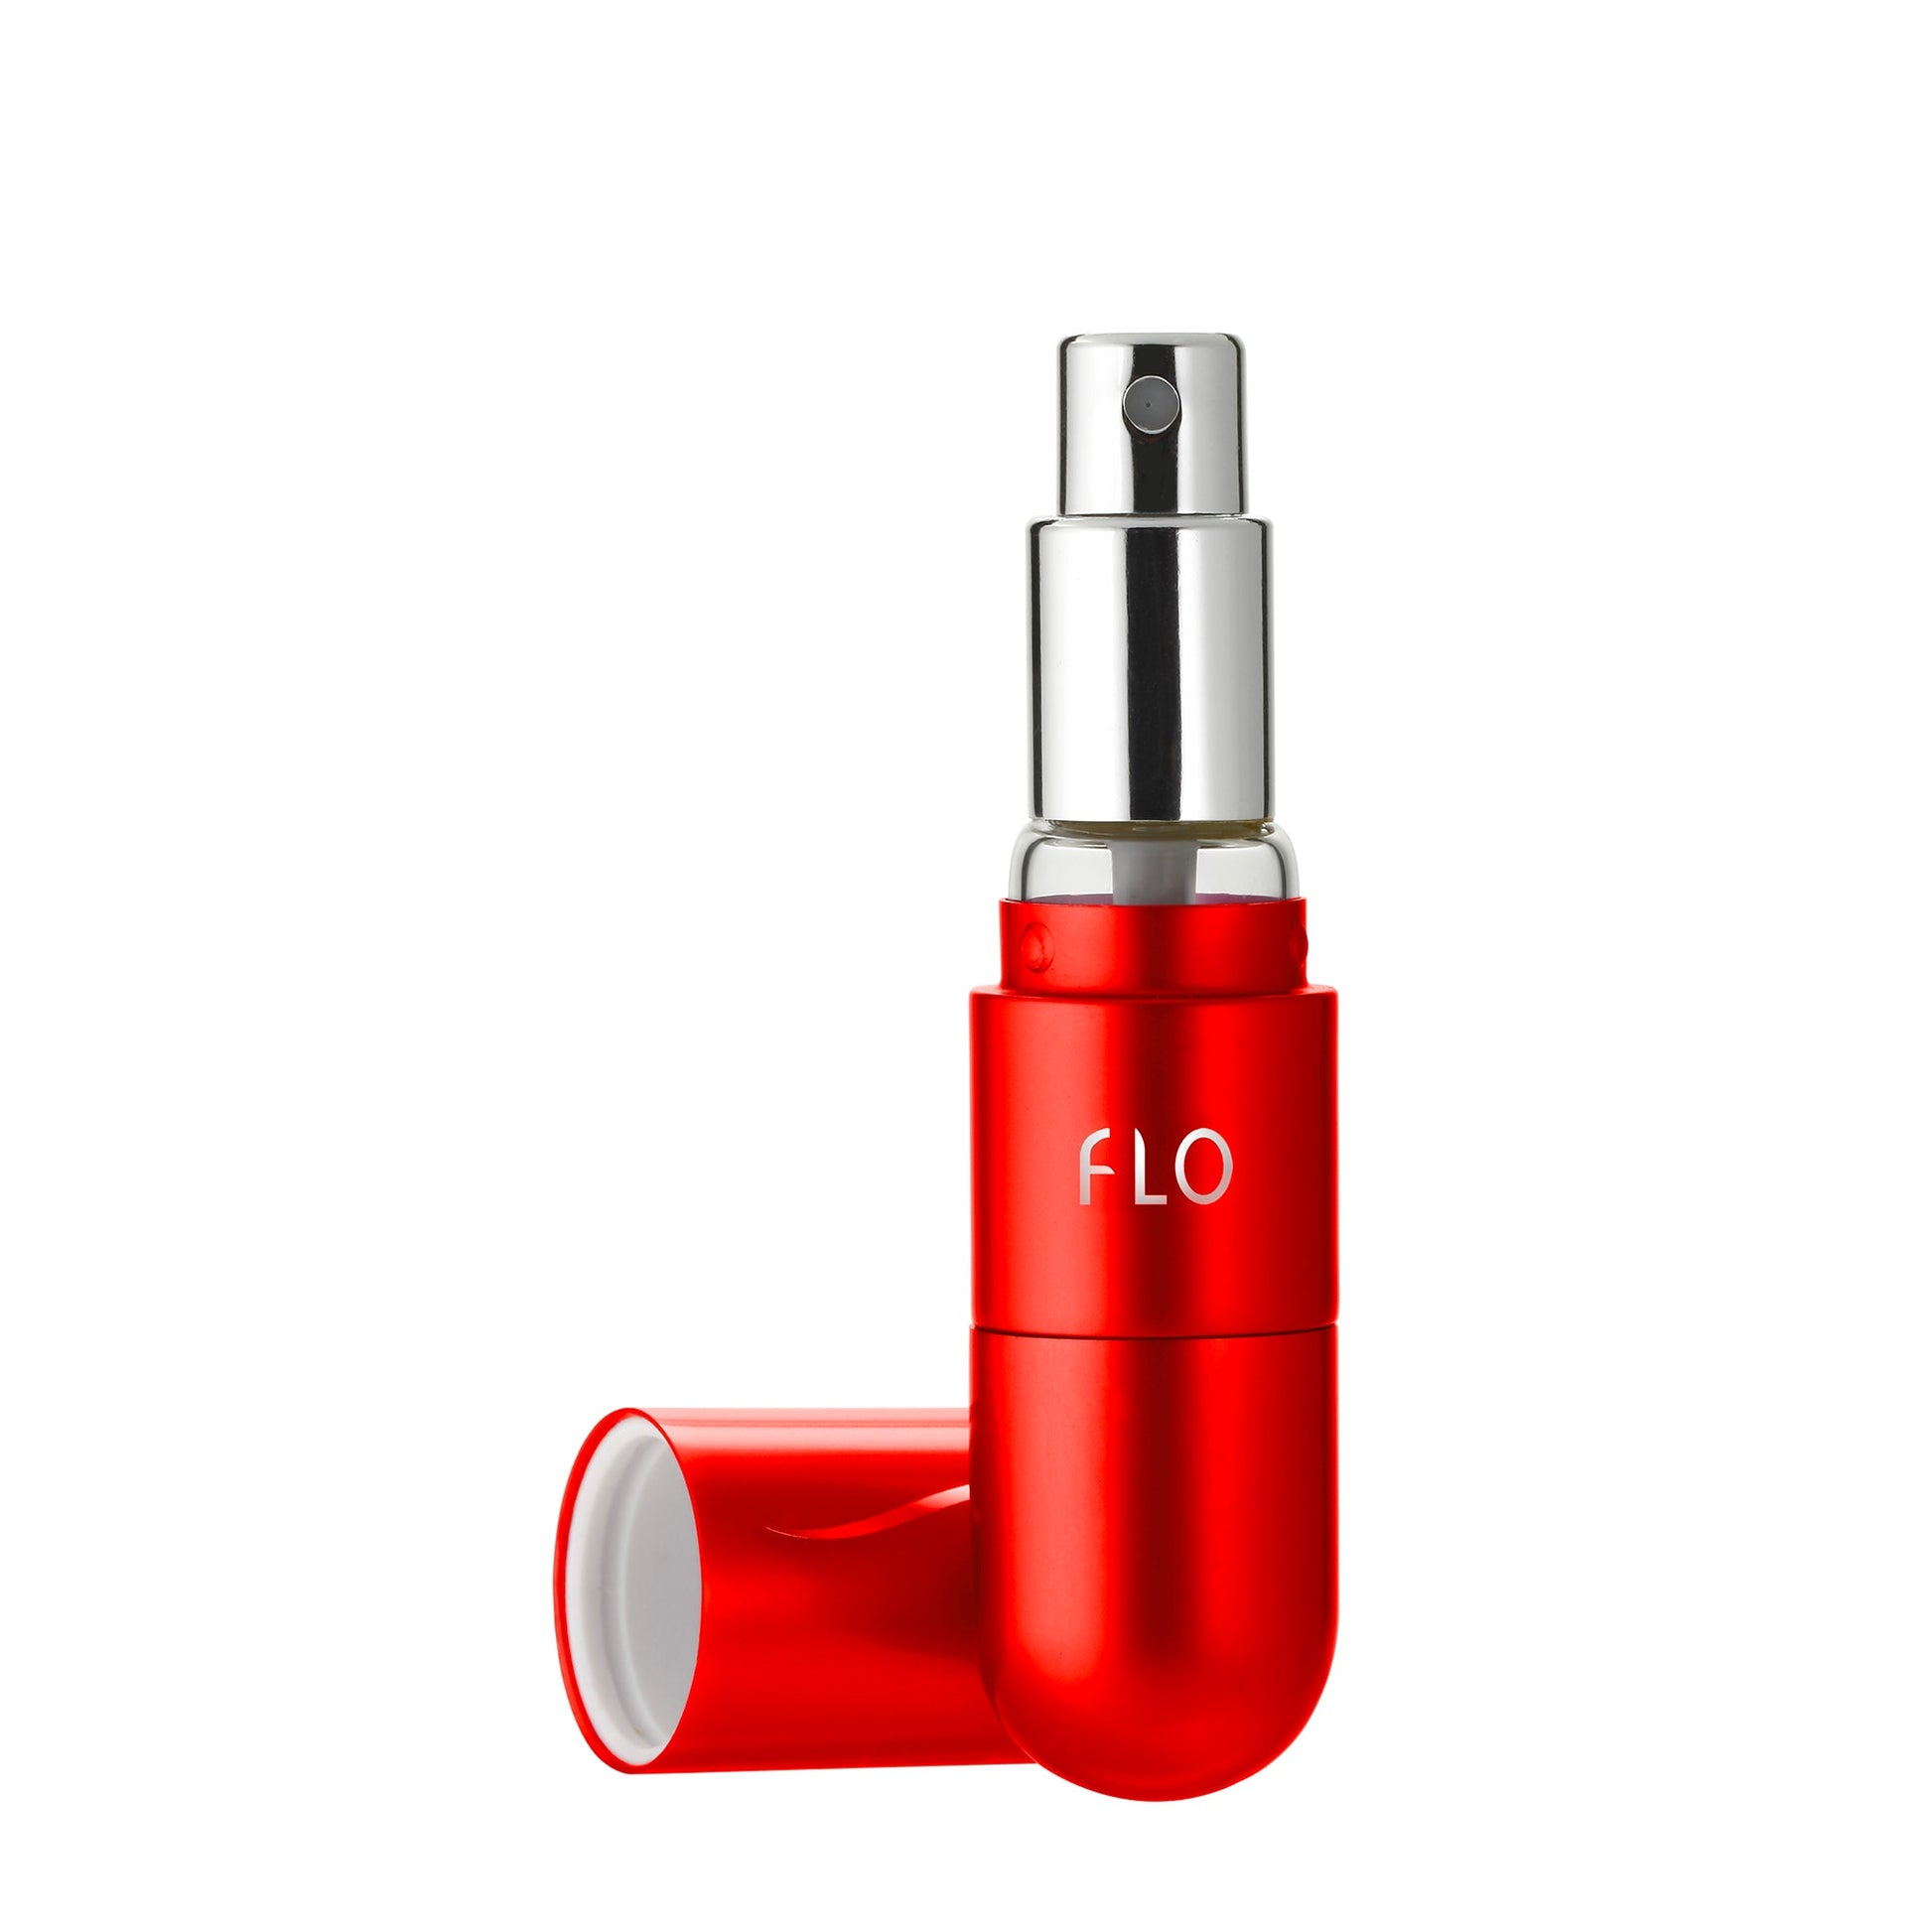 Pump and Fill Fragrance Atomizer by Flo, Product image 9